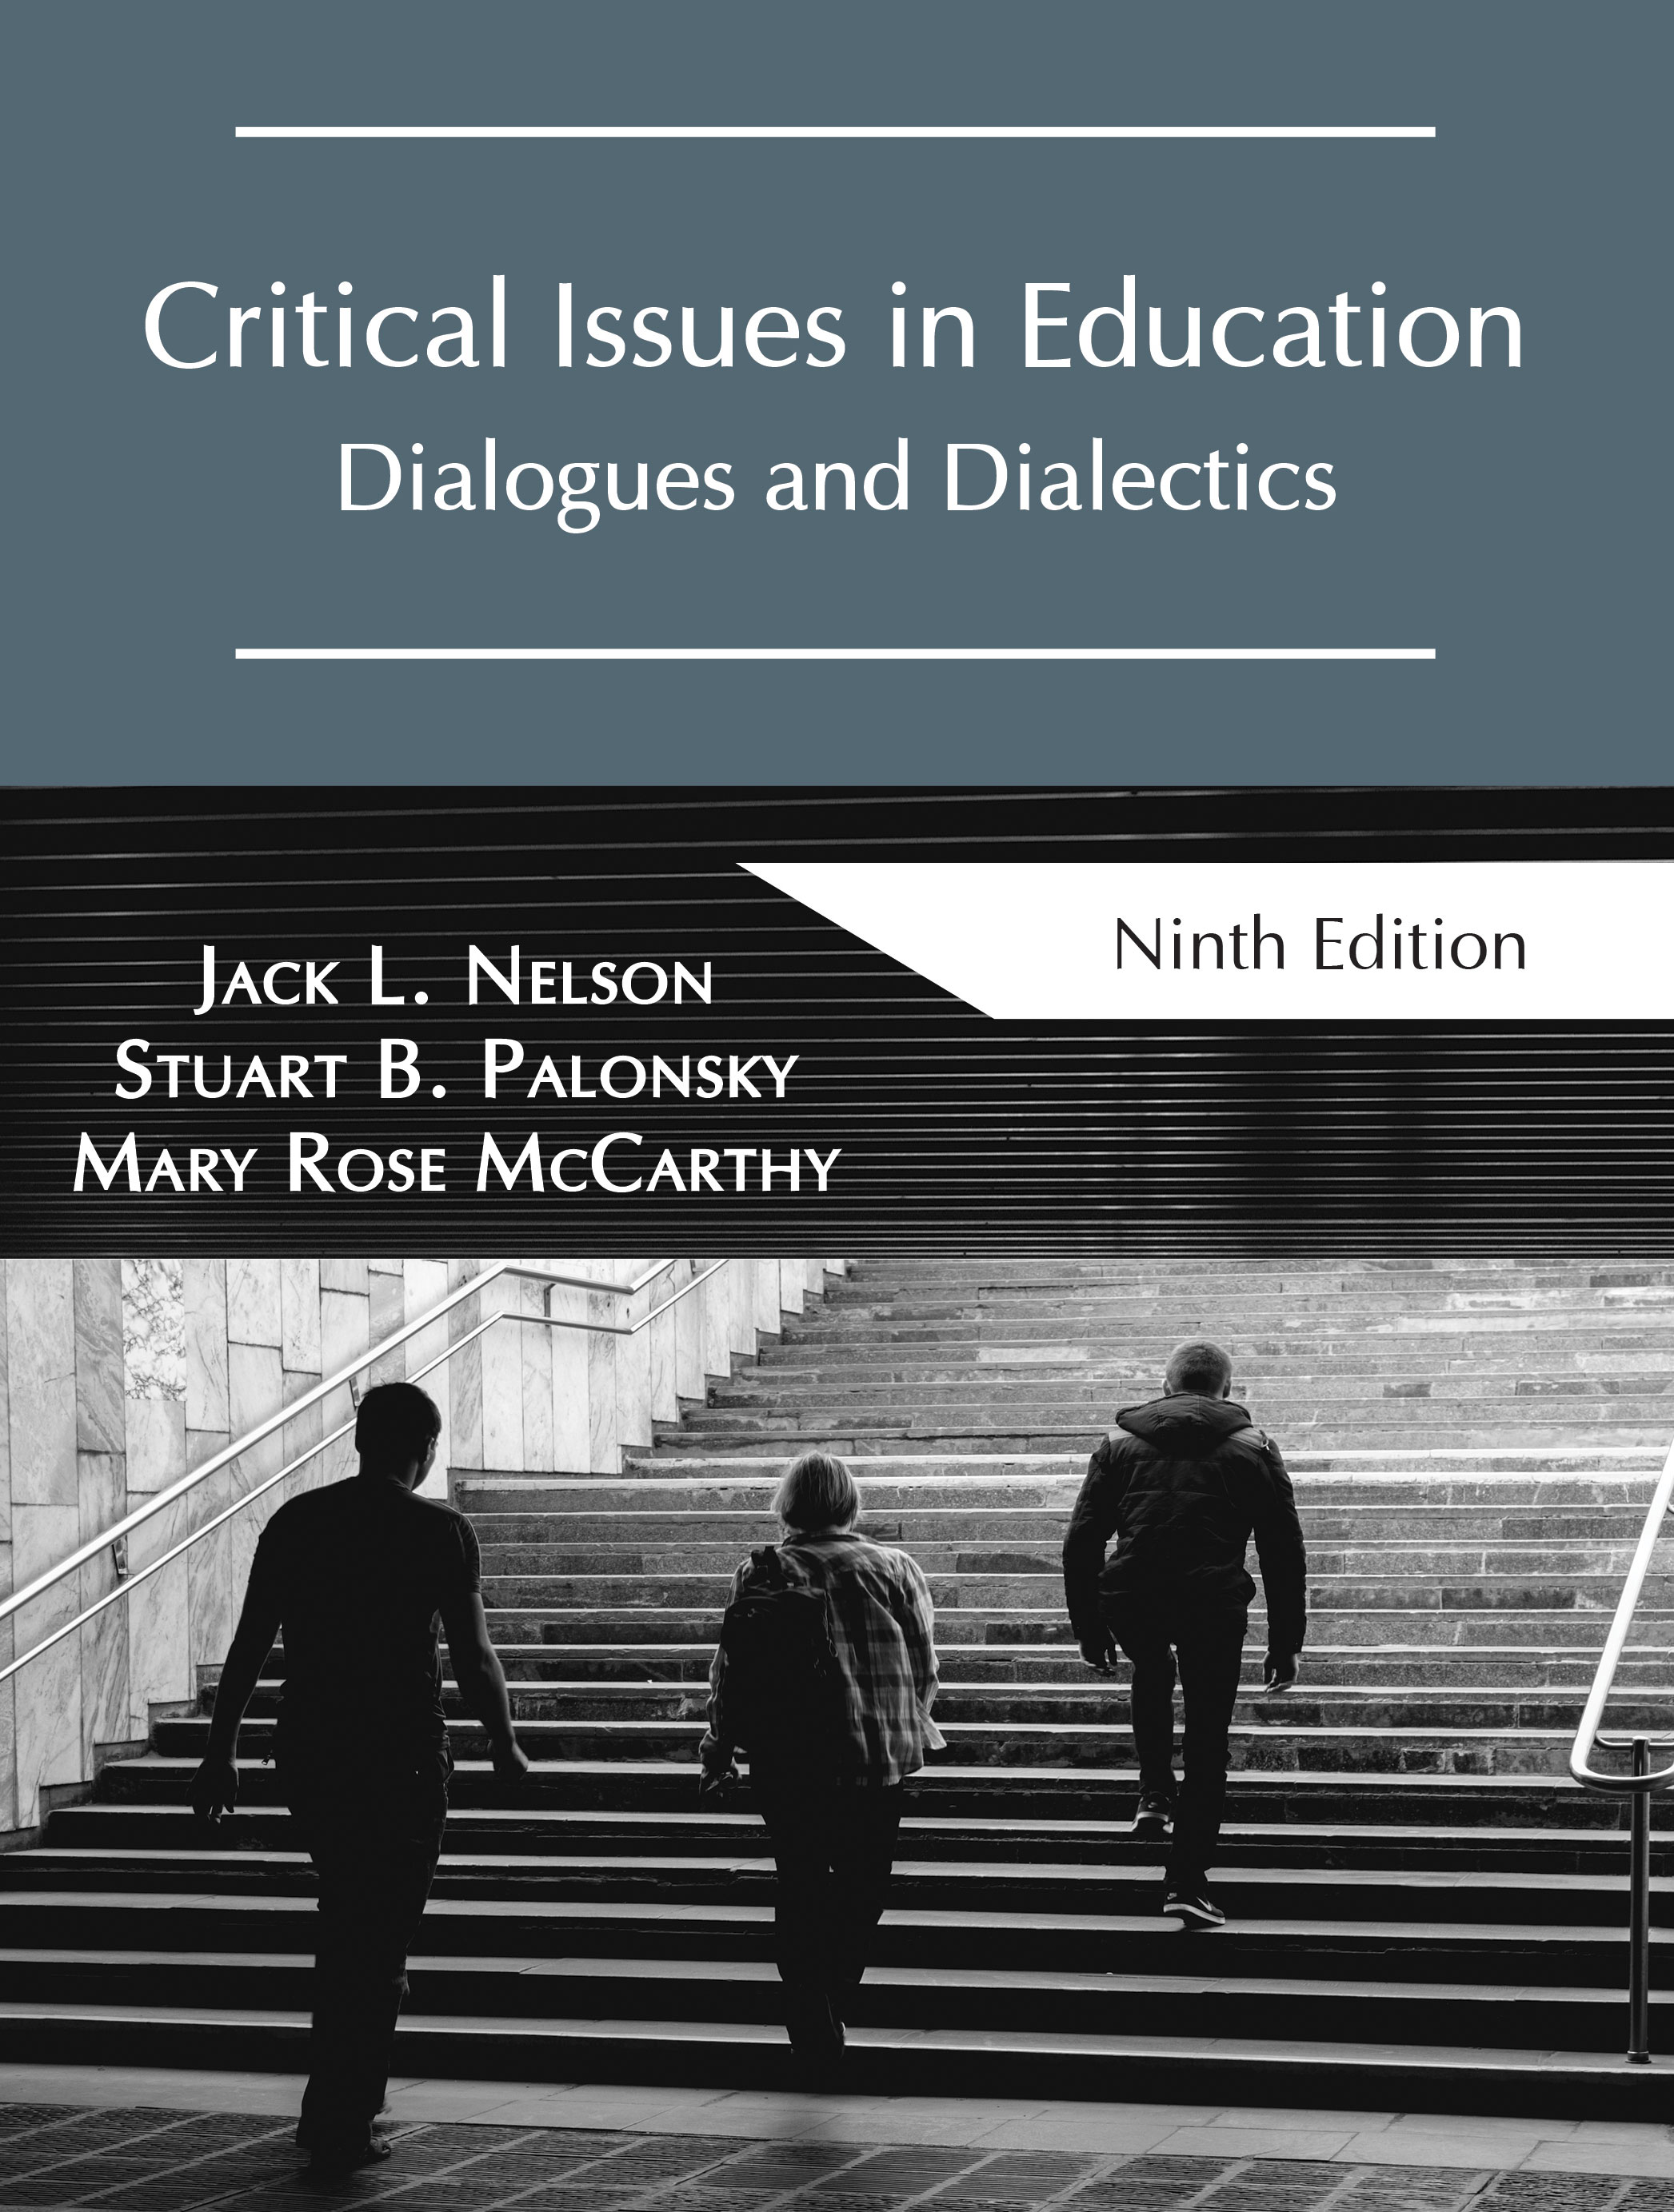 Critical Issues in Education: Dialogues and Dialectics by Jack L. Nelson, Stuart B. Palonsky, Mary Rose McCarthy